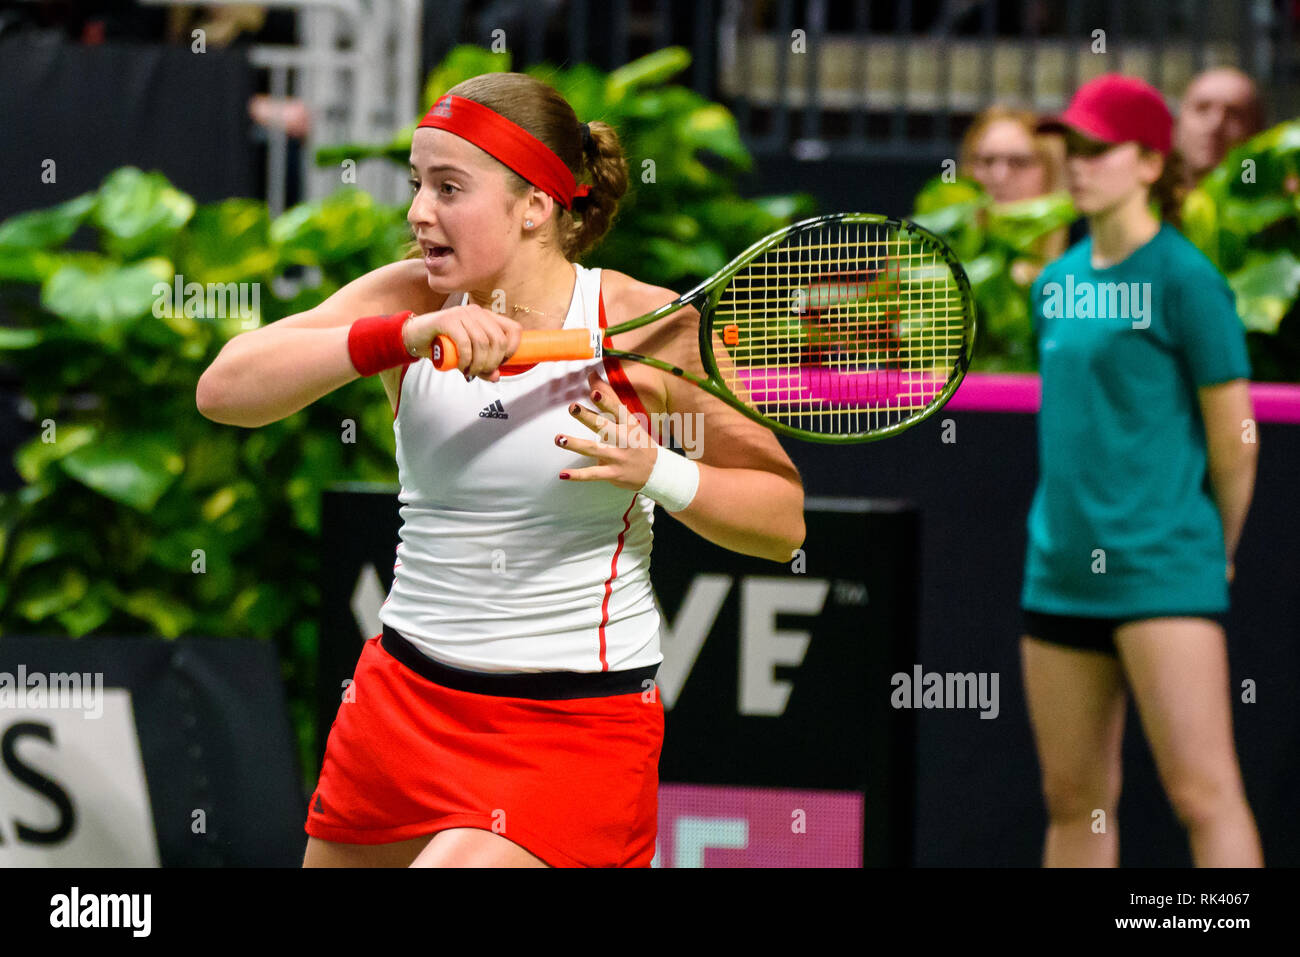 Riga, Latvia. 09th Feb, 2019. Alona Ostapenko (Jelena Ostapenko), during  FEDCUP BNP Paribas, The World Cup of Tennis World Group II First Round game  between team Latvia and team Slovakia at Arena